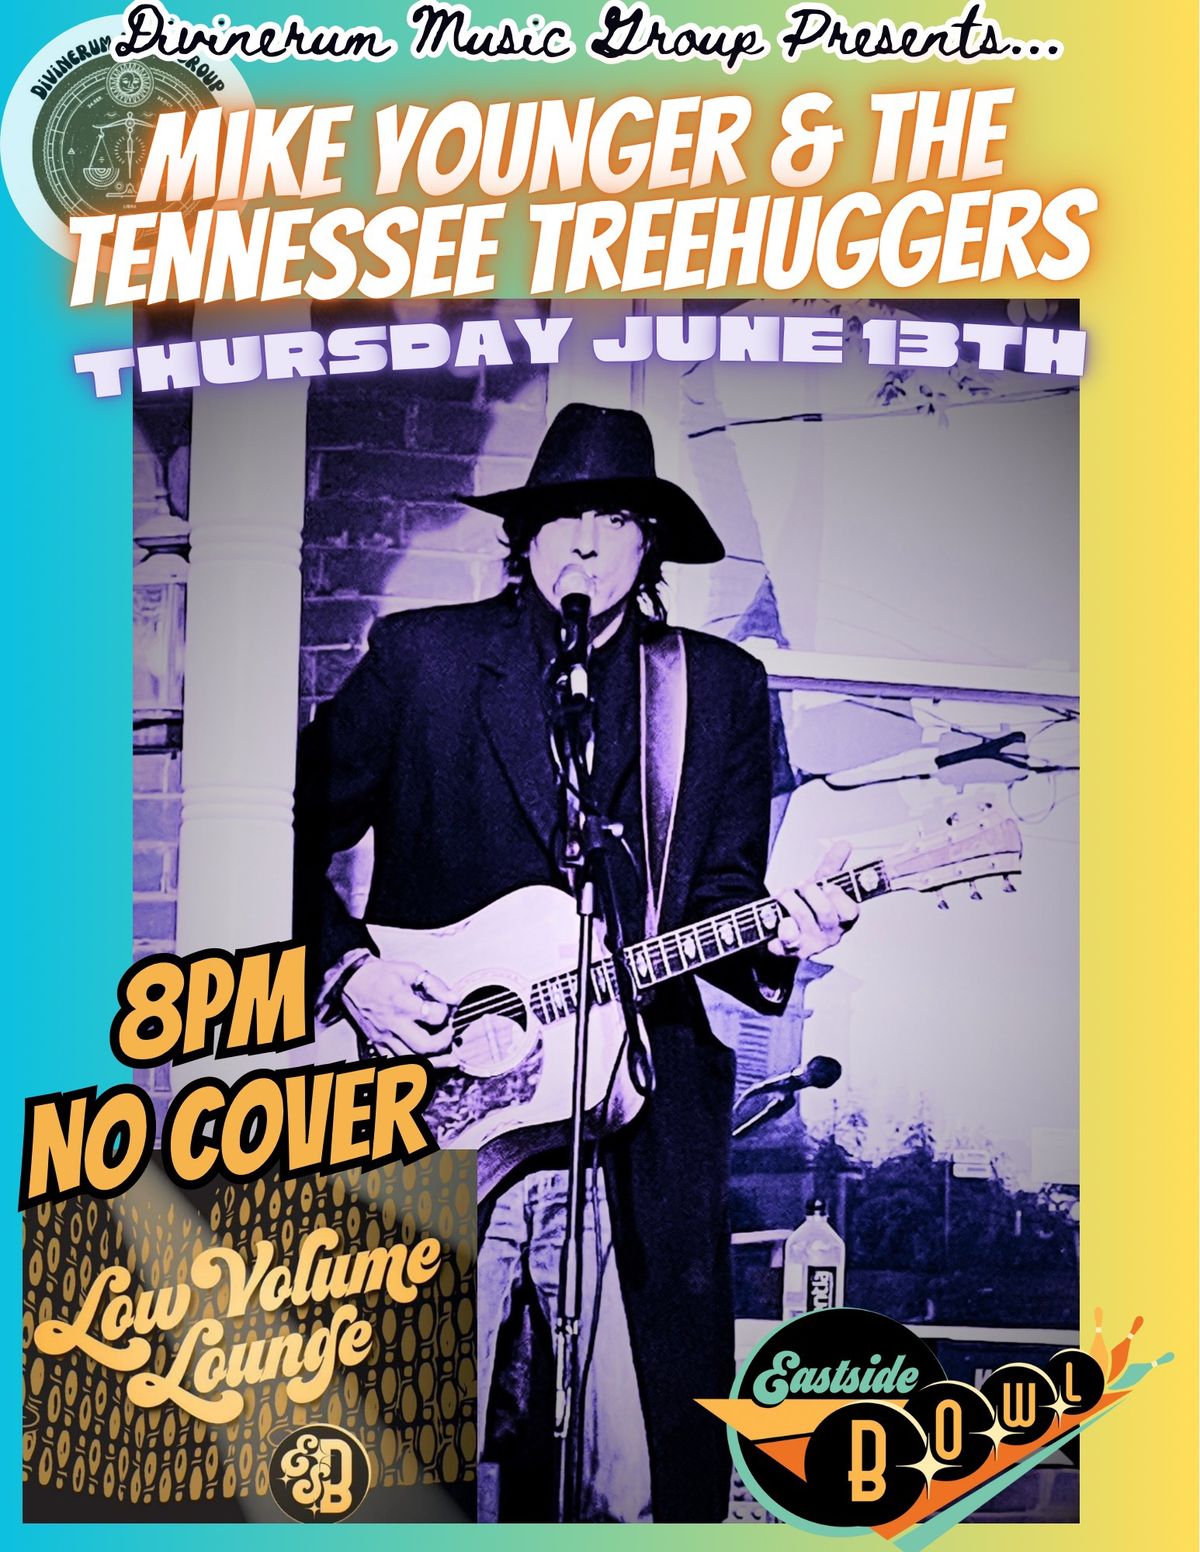 Mike Younger & The Tennessee Treehuggers Live @ The Low Volume Lounge